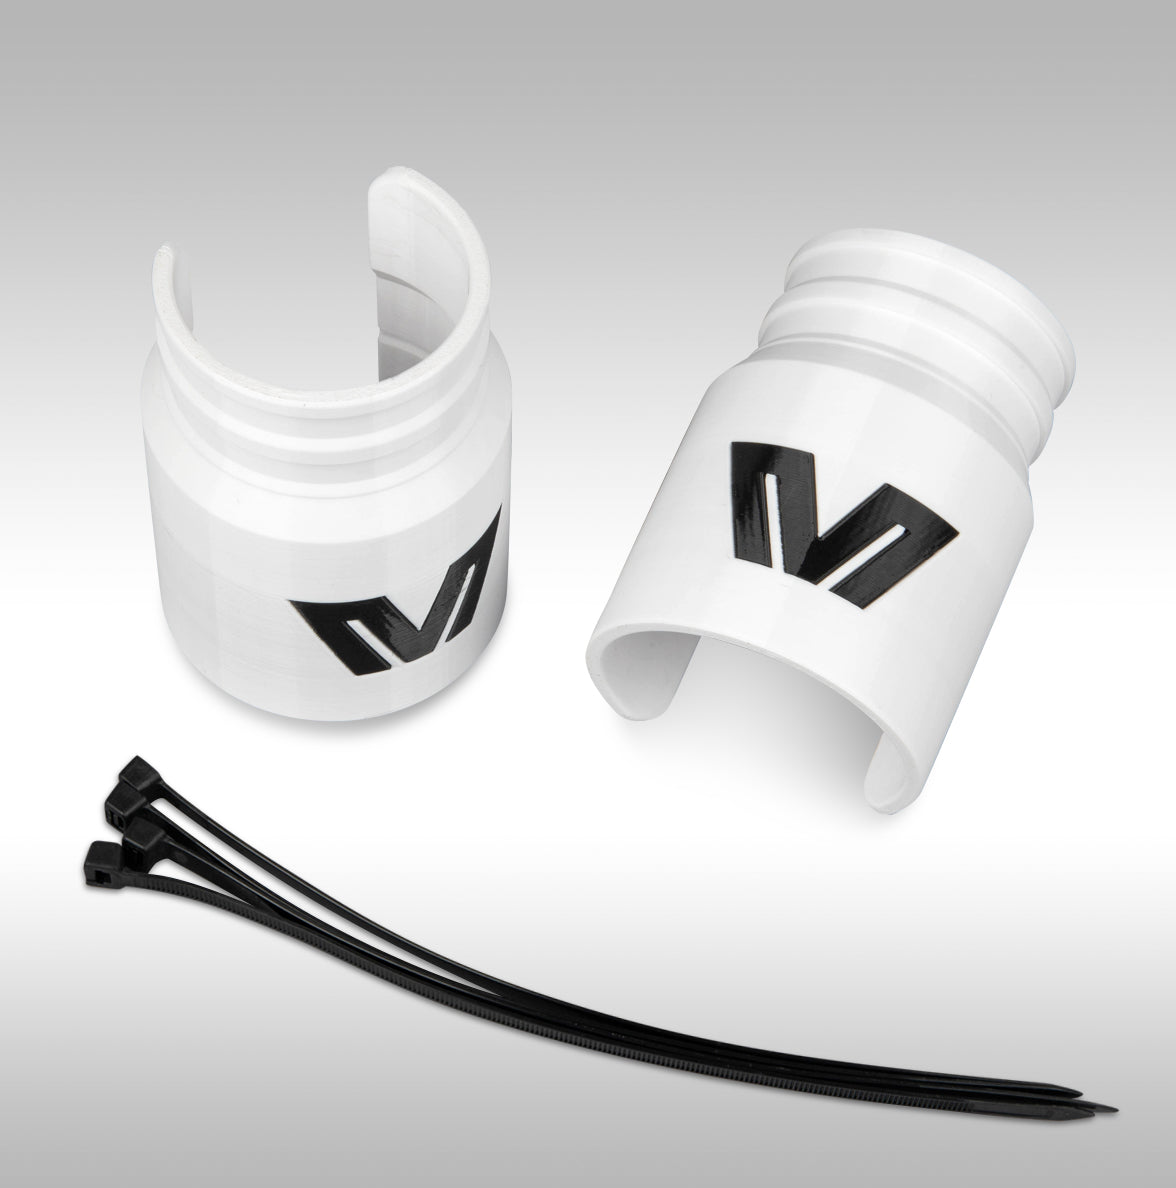 White DesertX fork mud guard. Additional plastic guard to help protect the Ducati Desert X fork seals from excessive mud buildup while riding offroad. 